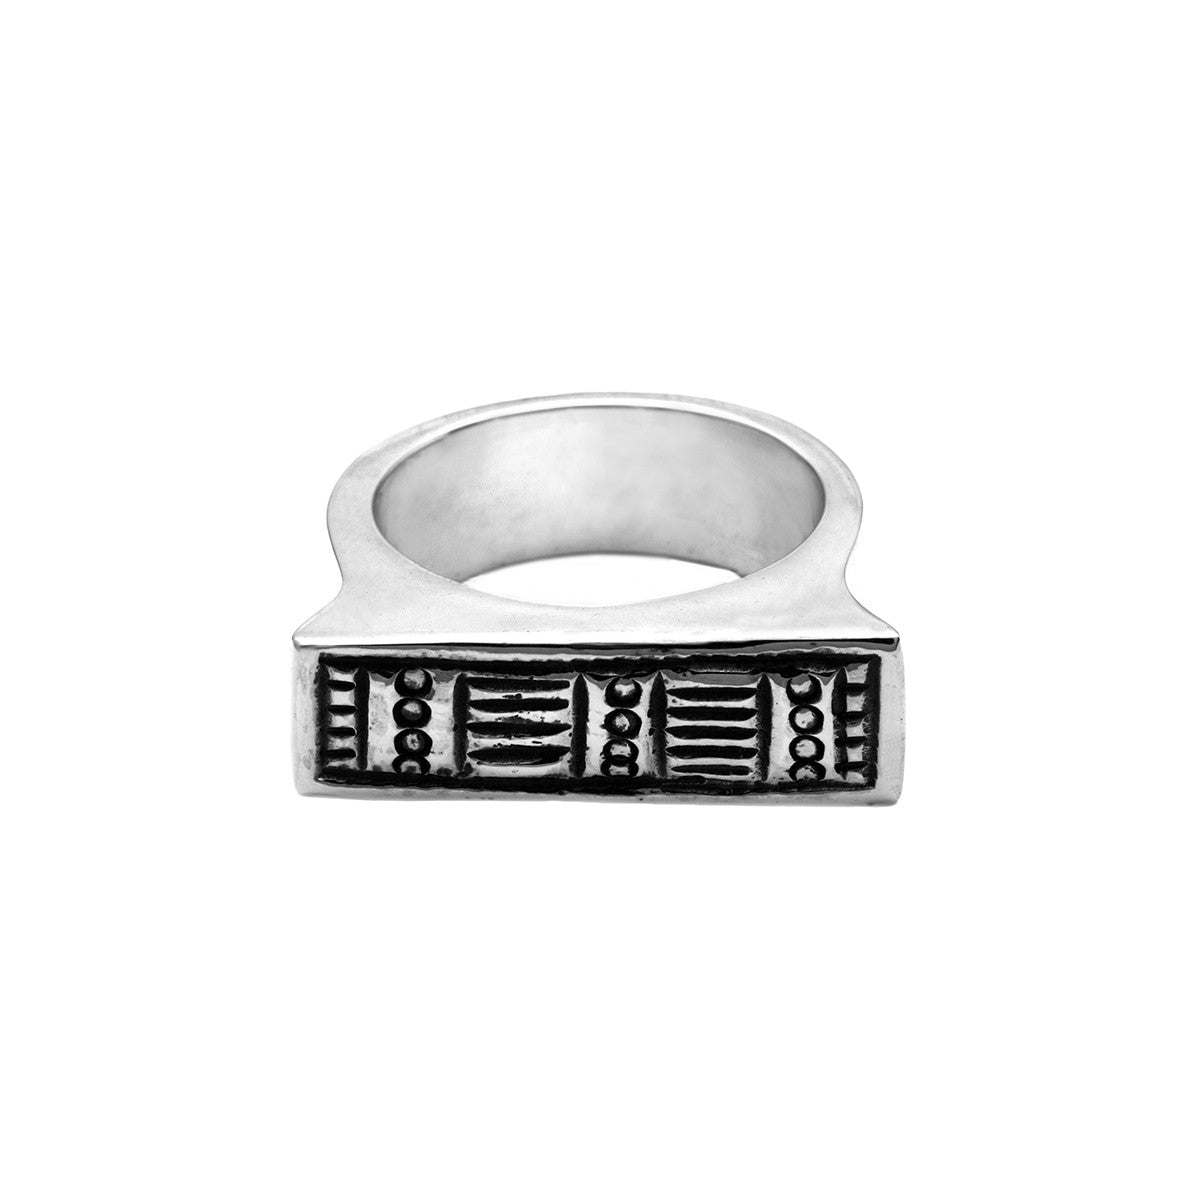 Wiener Werkstatte Line Out Stack Ring - Cynthia Gale New York Jewelry